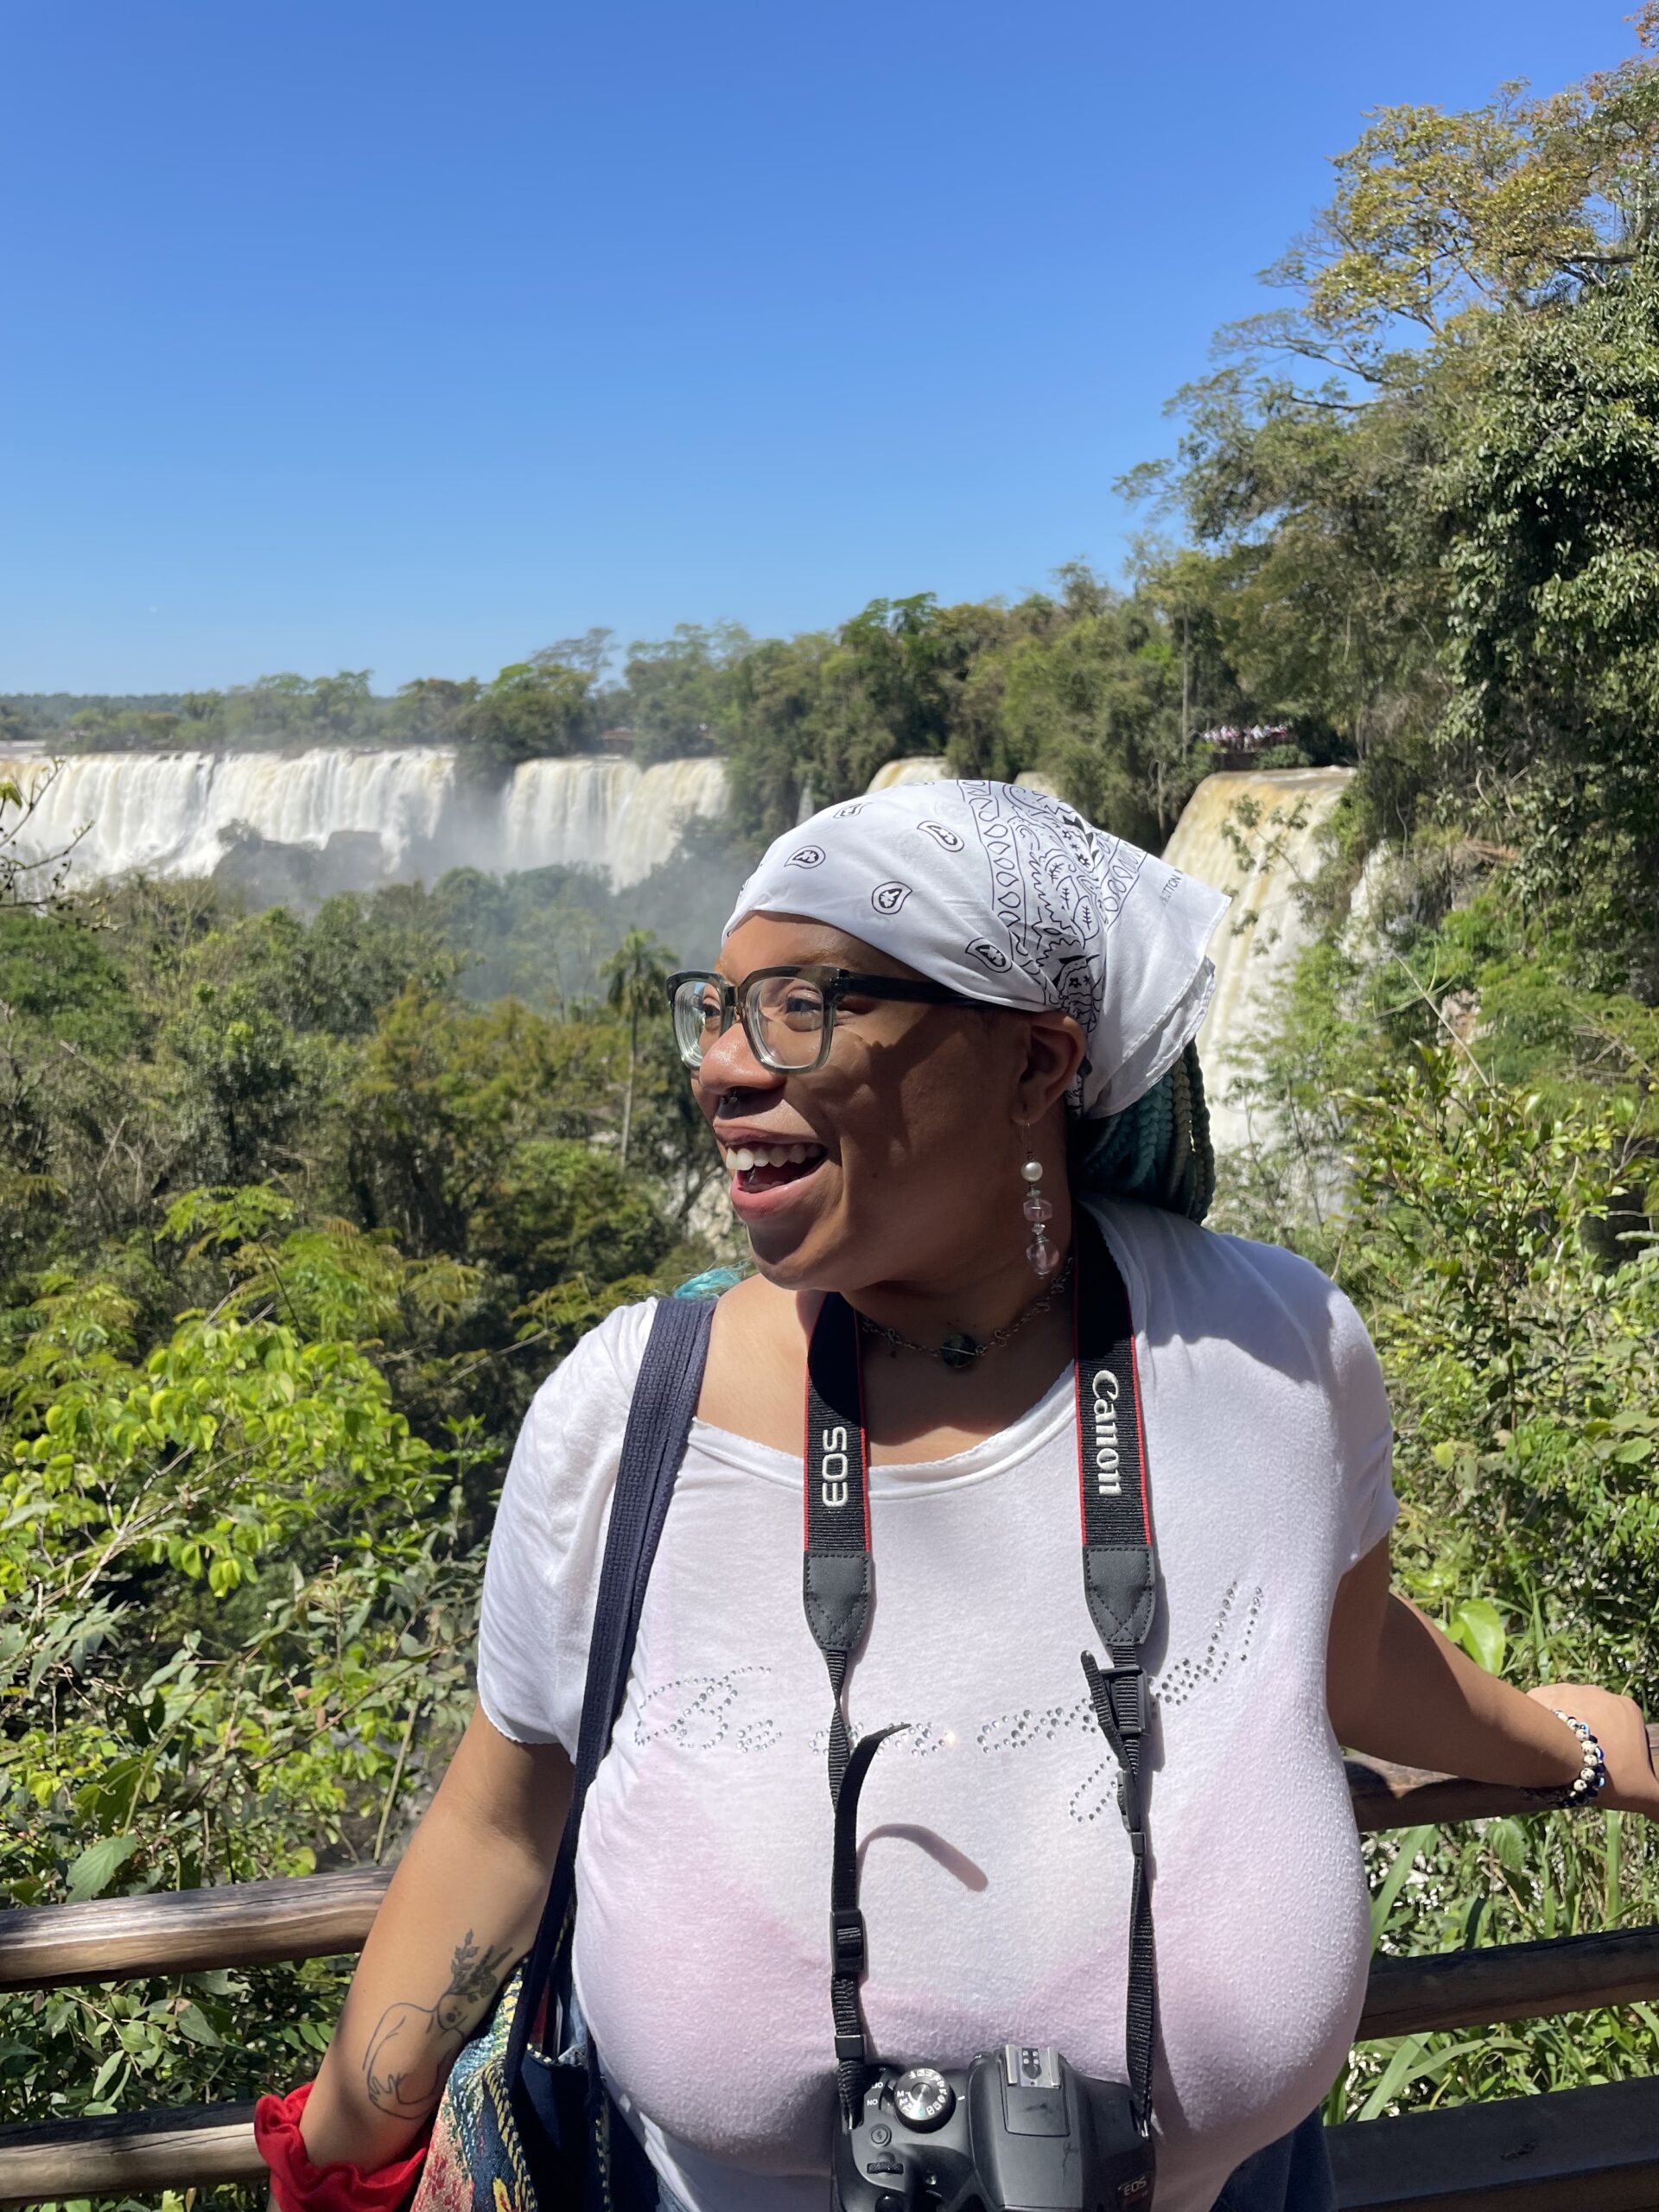 A Black person in a white top and white bandana turns to the side and smiles with greenery and a waterfall flowing behind them in Buenos Aires.